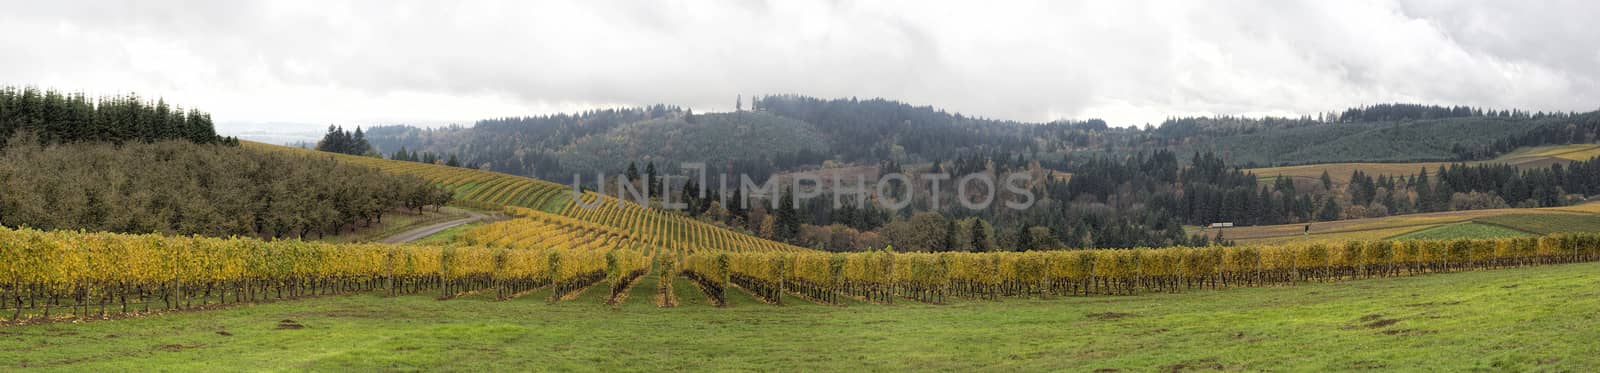 Dundee Oregon Vineyards on Rolling Hills with Morning Fog in Fall Season Sweeping View Panorama